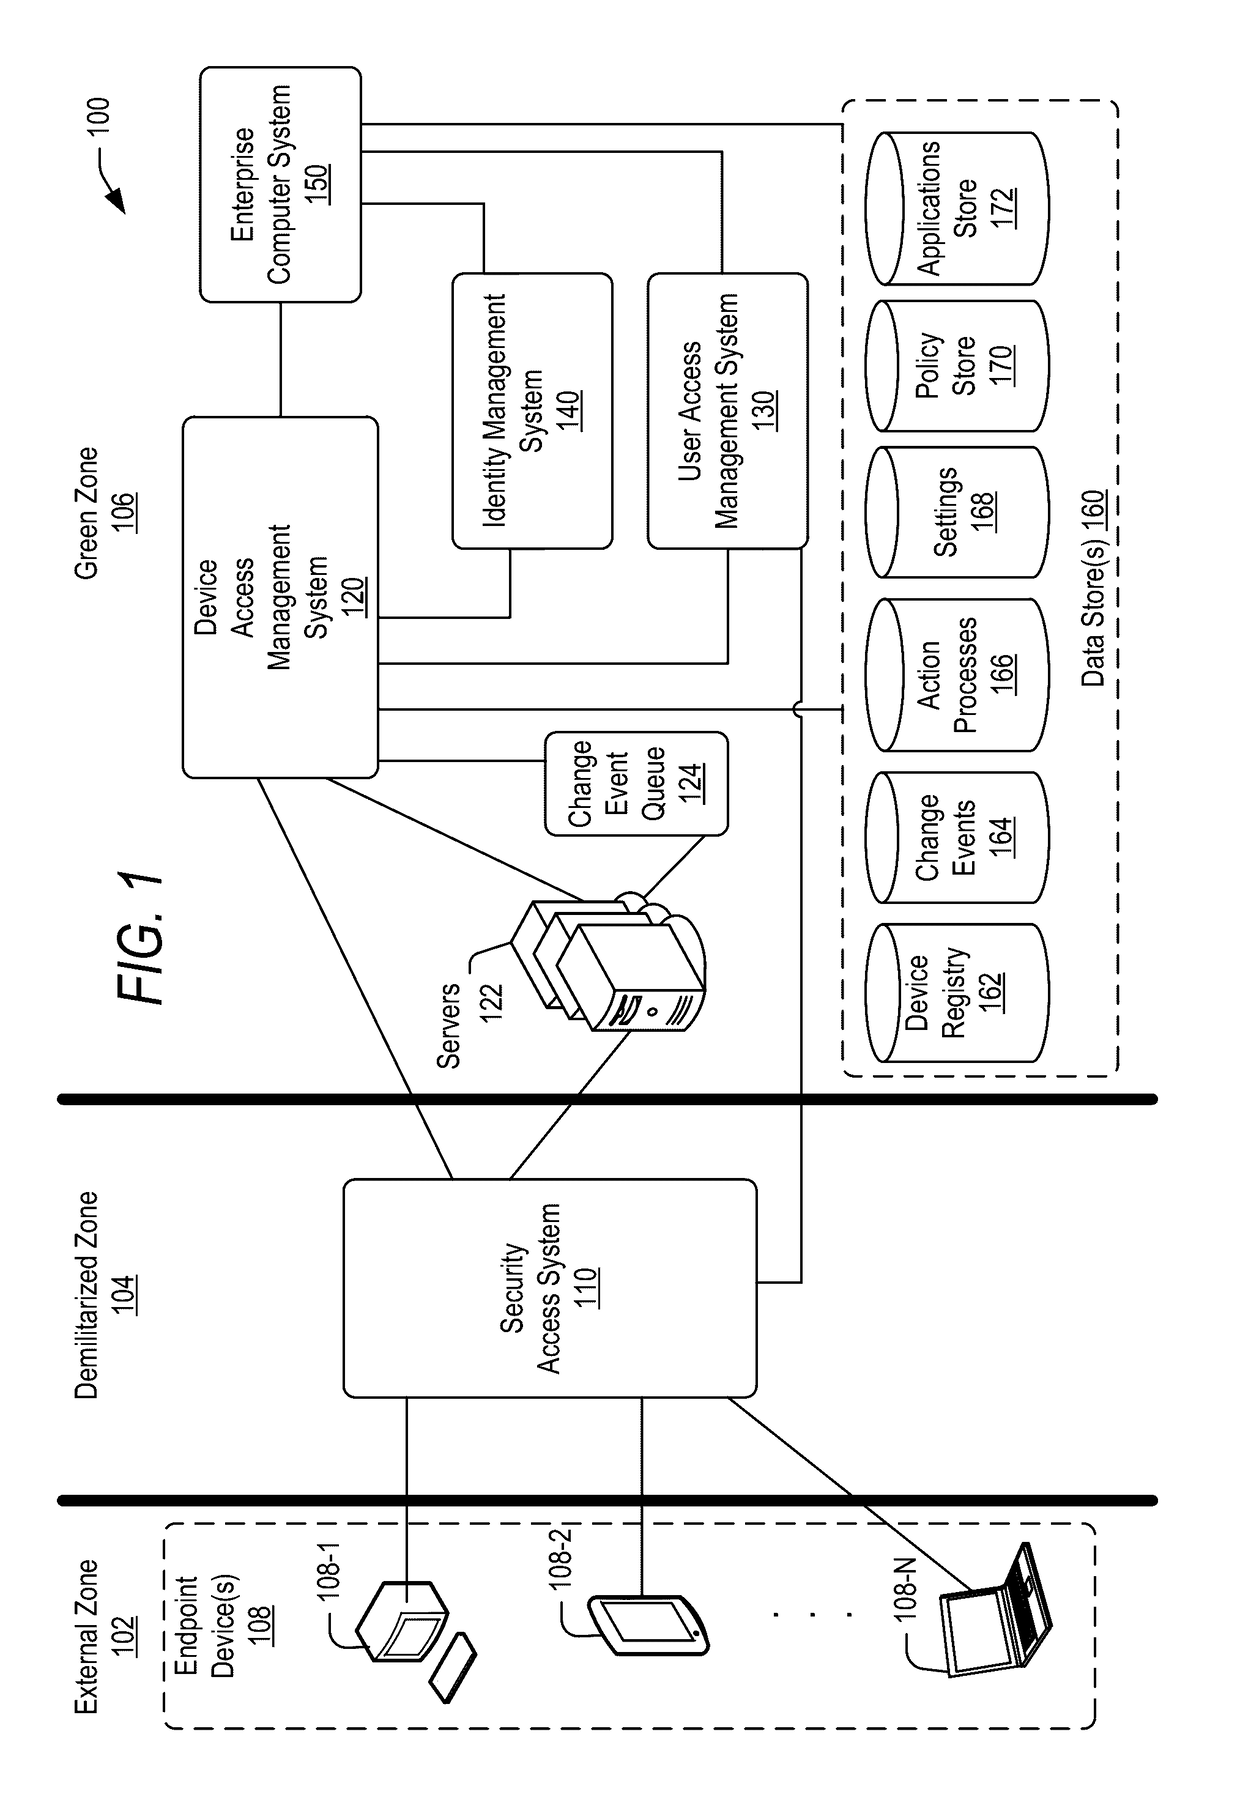 Managing change events for devices in an enterprise system